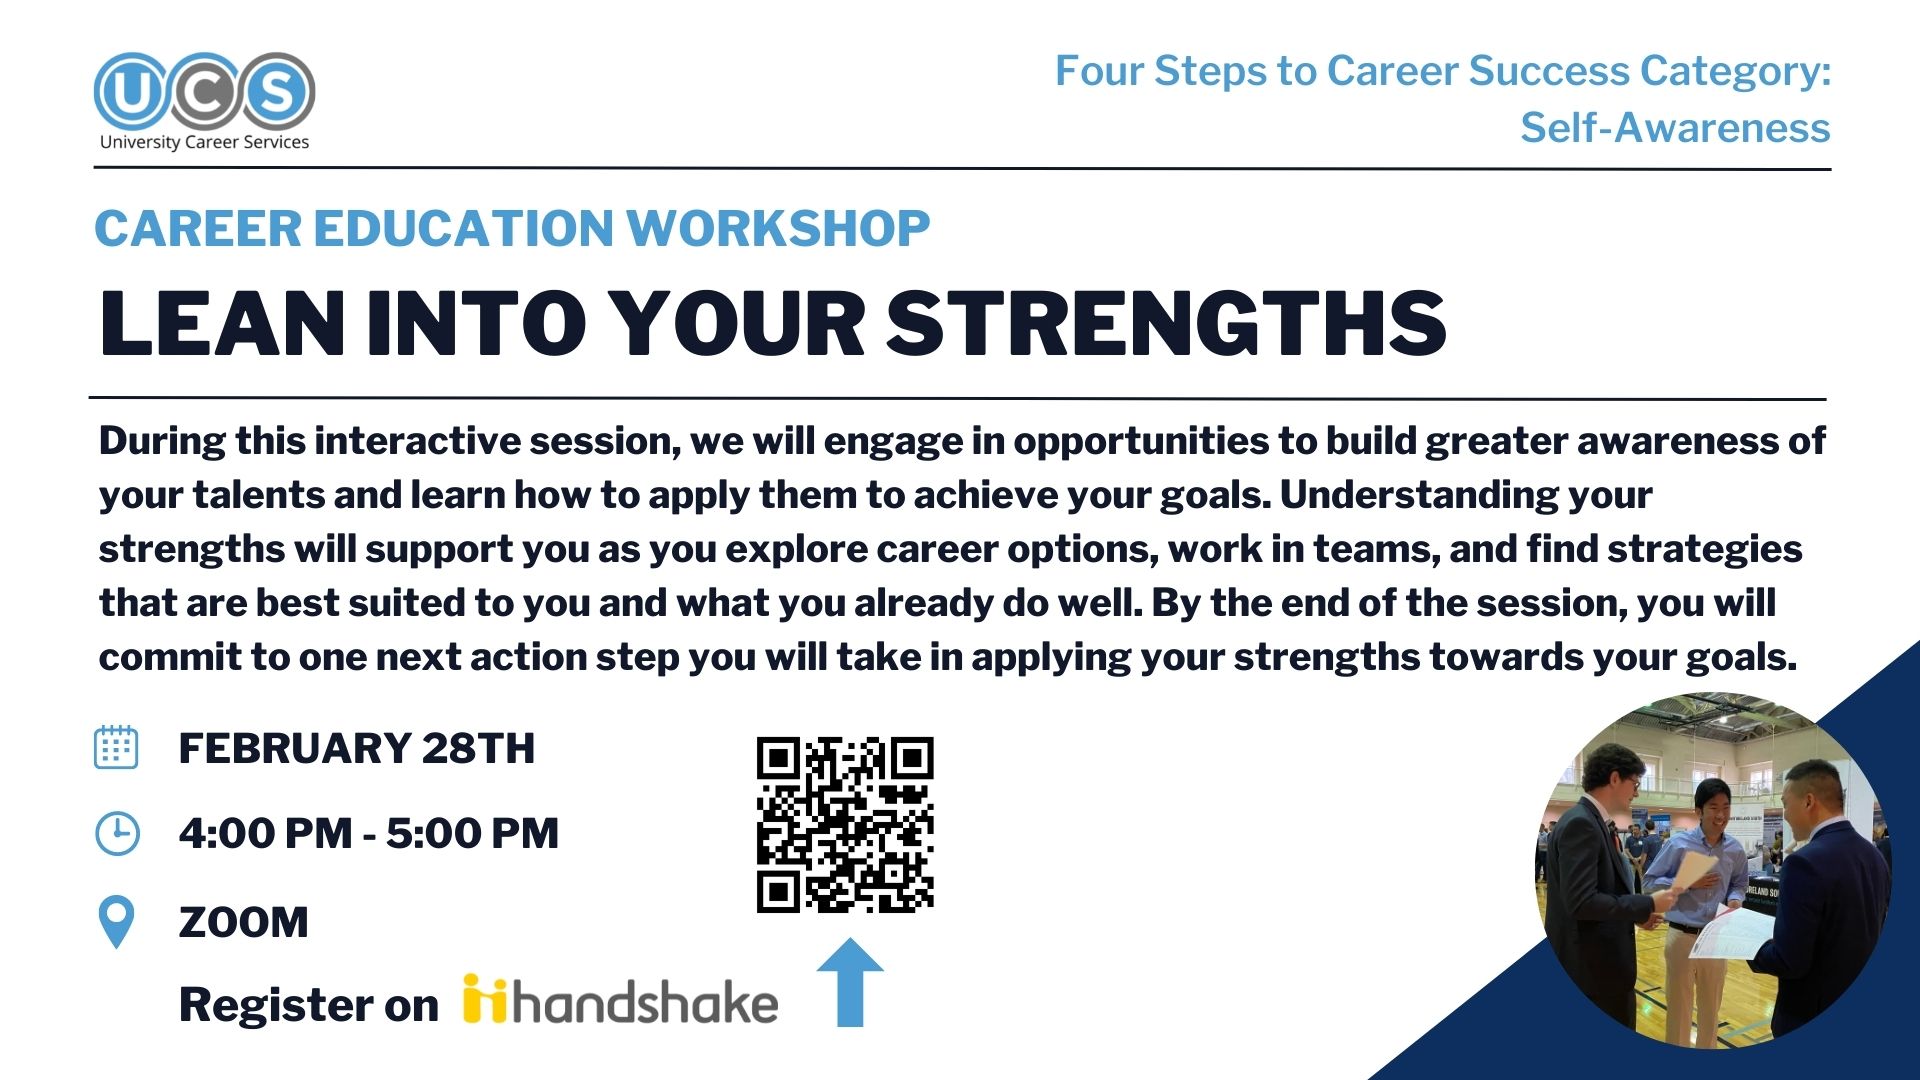 During this interactive session, we will engage in opportunities to build greater awareness of your talents and learn how to apply them to achieve your goals. Understanding your strengths will support you as you explore career options, work in teams, and 